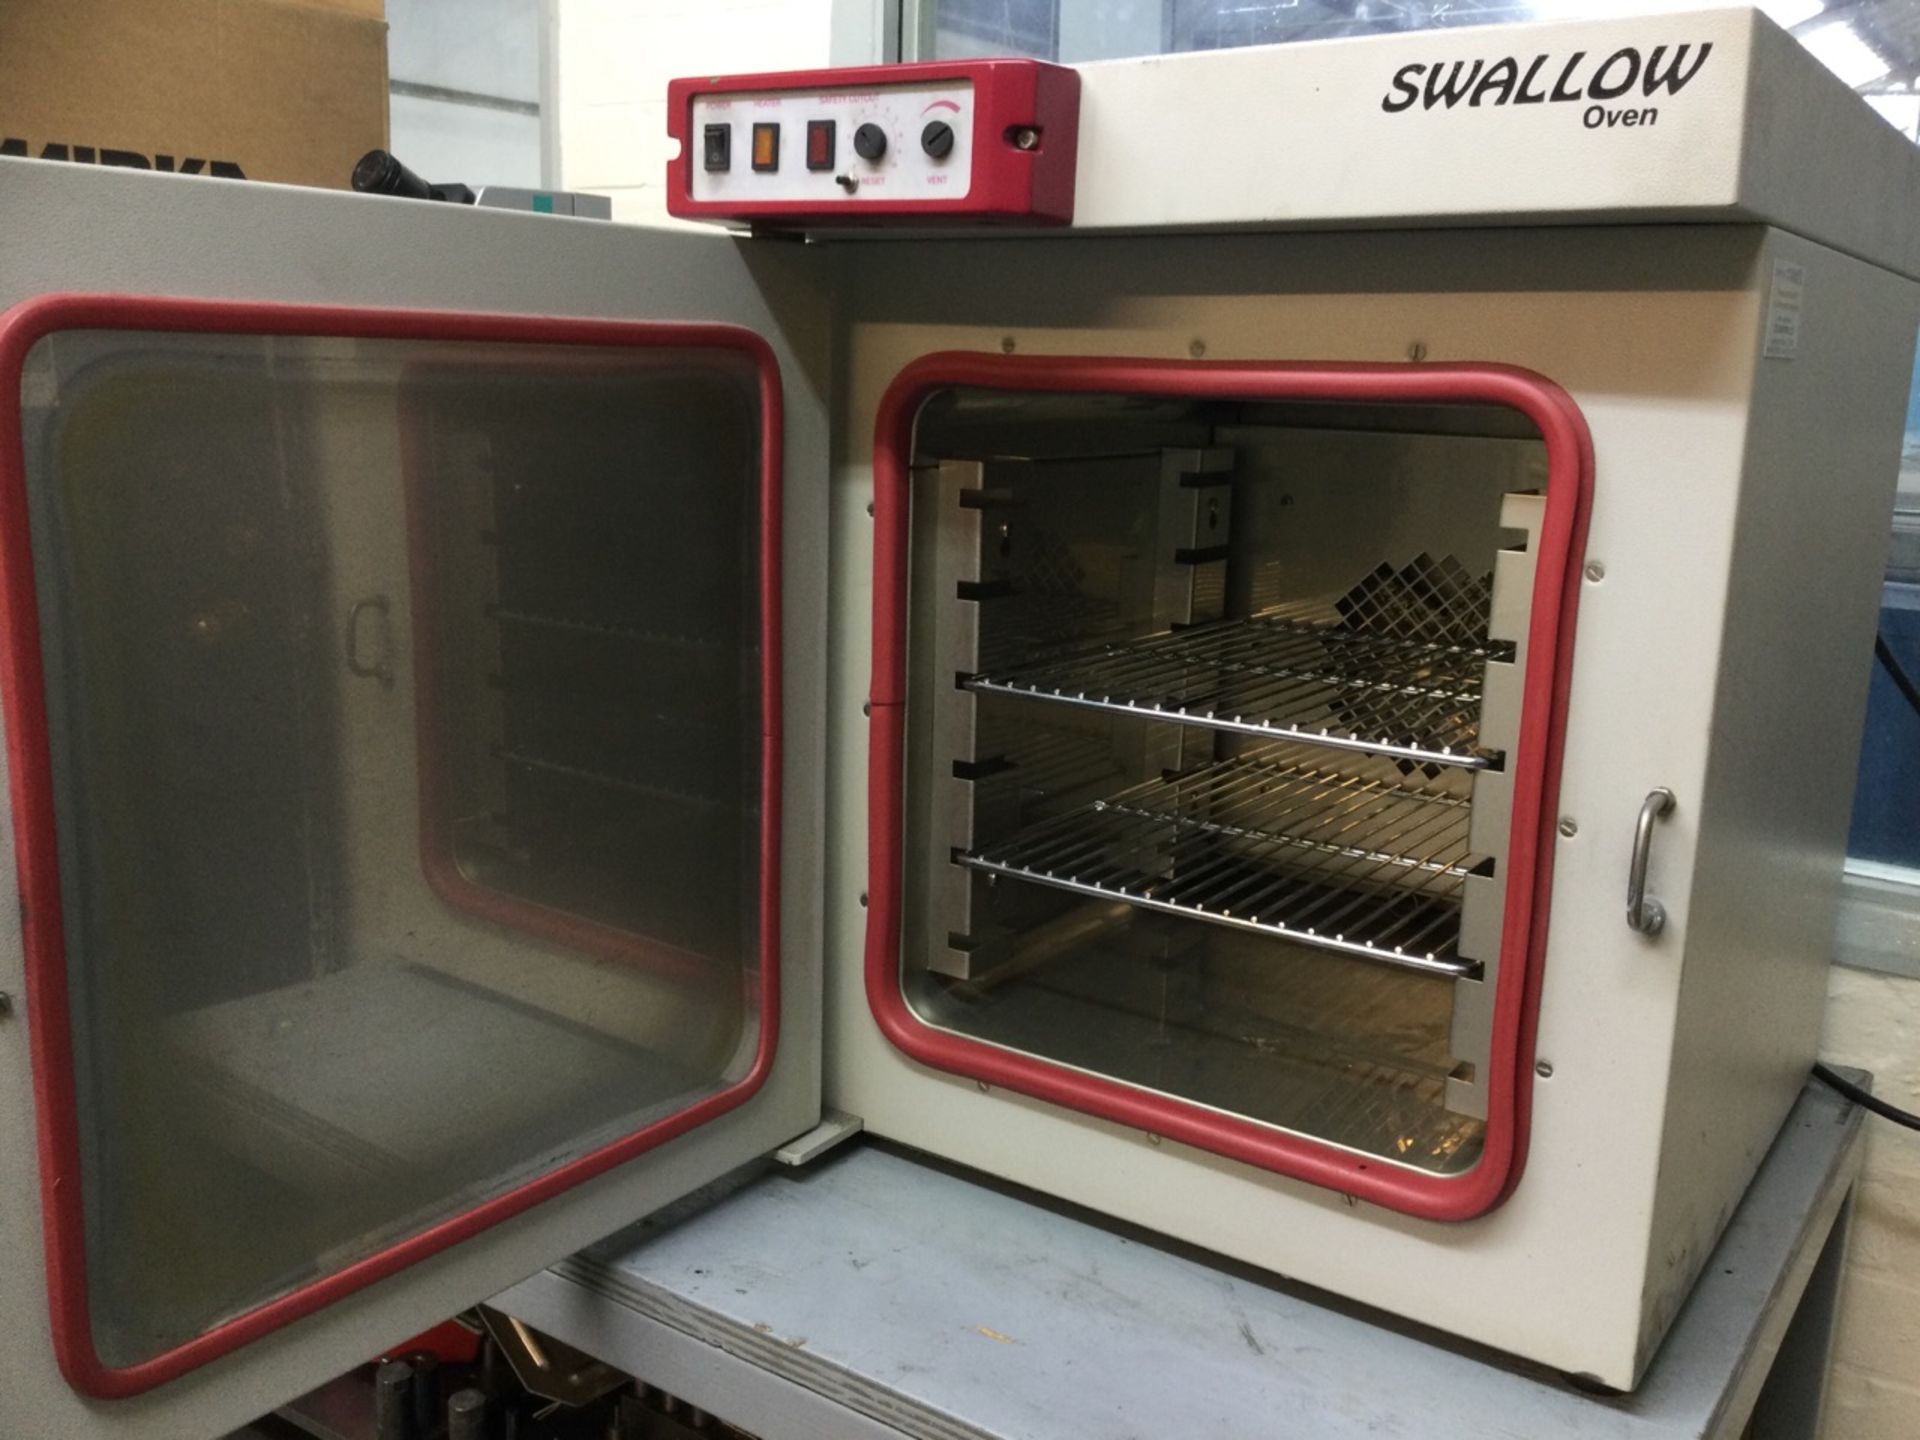 1 Swallow, Counter top oven, Serial Number: J2837 - Image 4 of 4